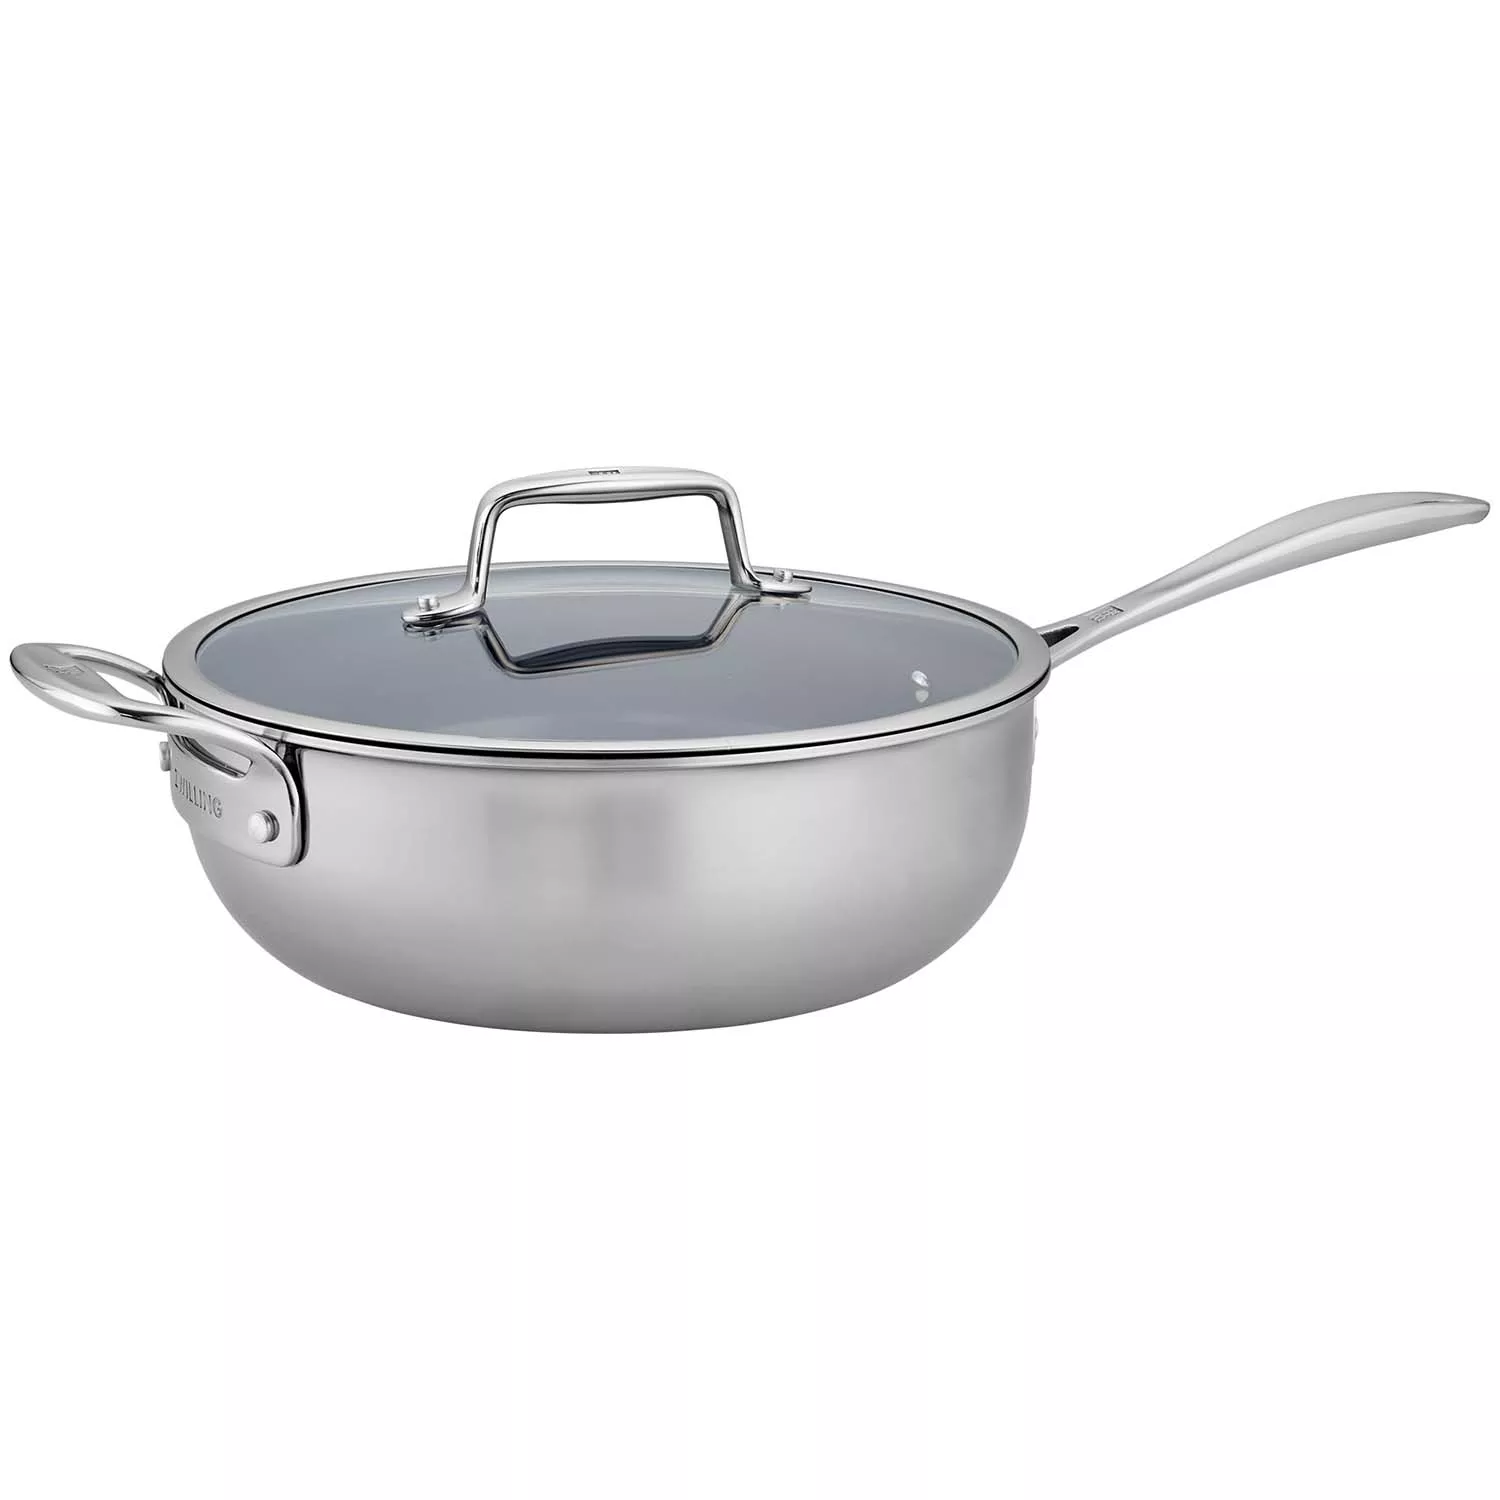 Zwilling Clad CFX 4.5-qt Stainless Steel Ceramic Nonstick Perfect Pan